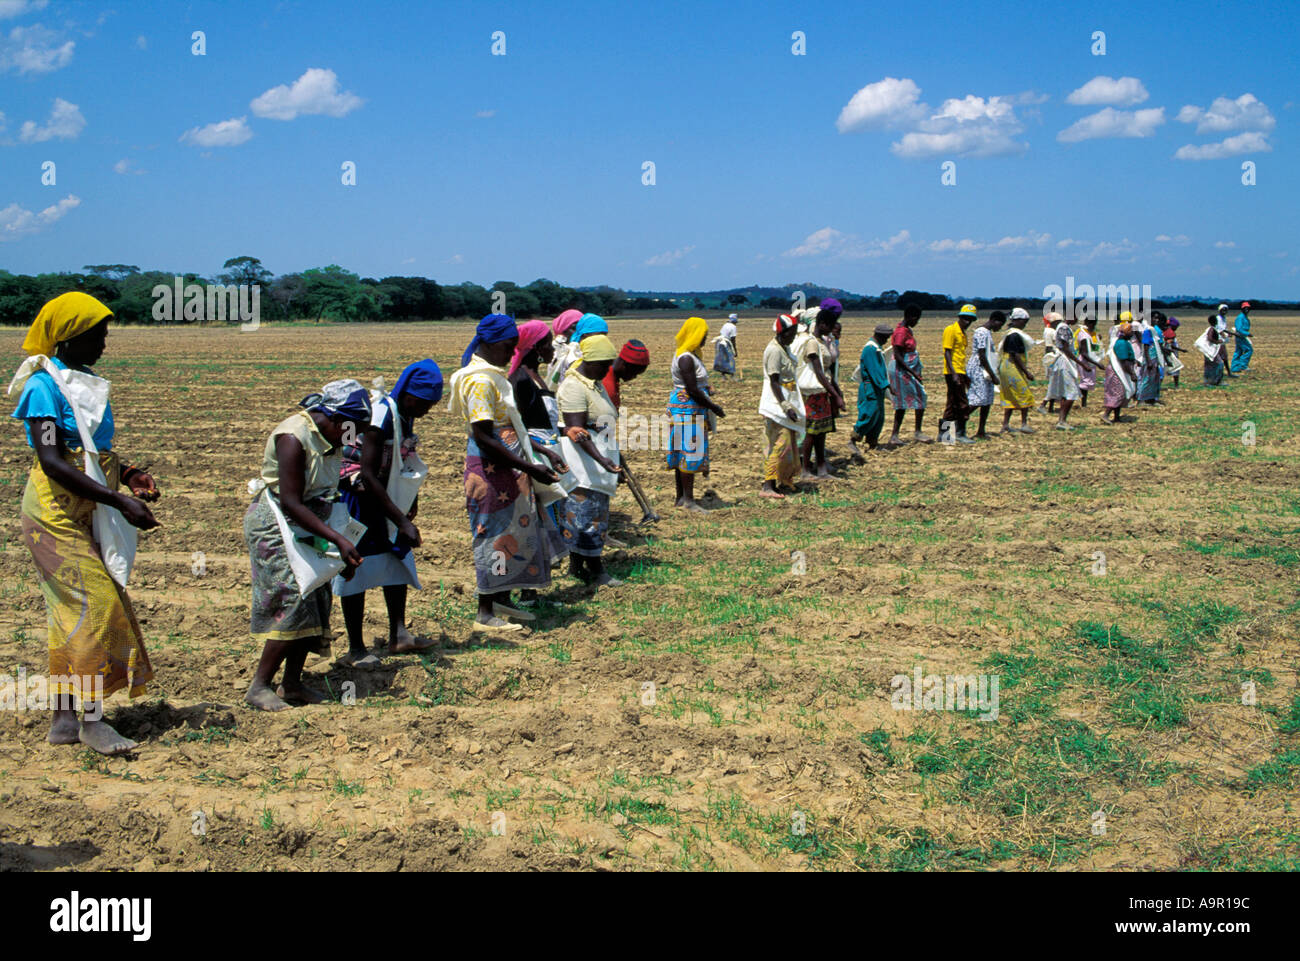 Row of colorfully dressed African women planting corn in Zimbabwe Stock Photo